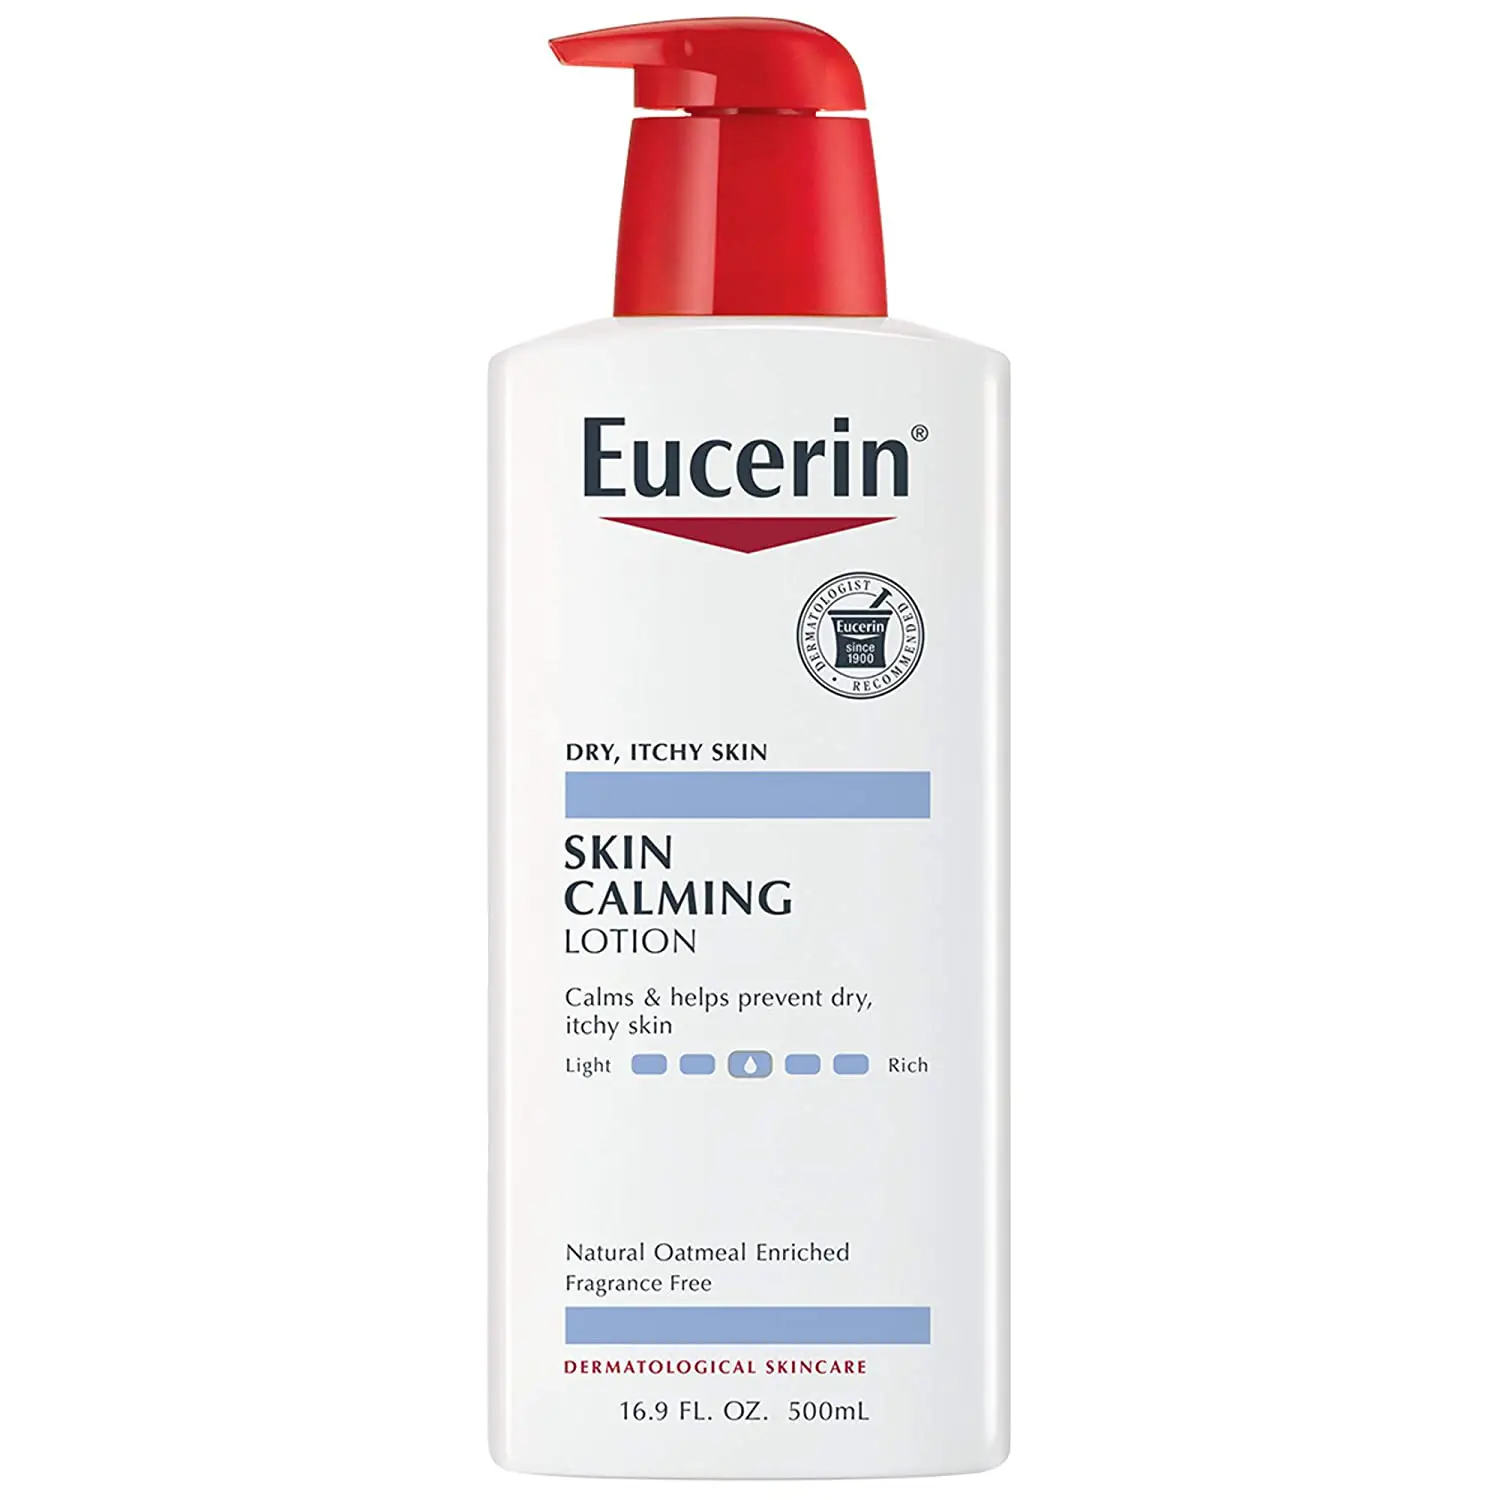 Can You Use Eucerin on Tattoos? New Tattoo Aftercare Help - Tattify